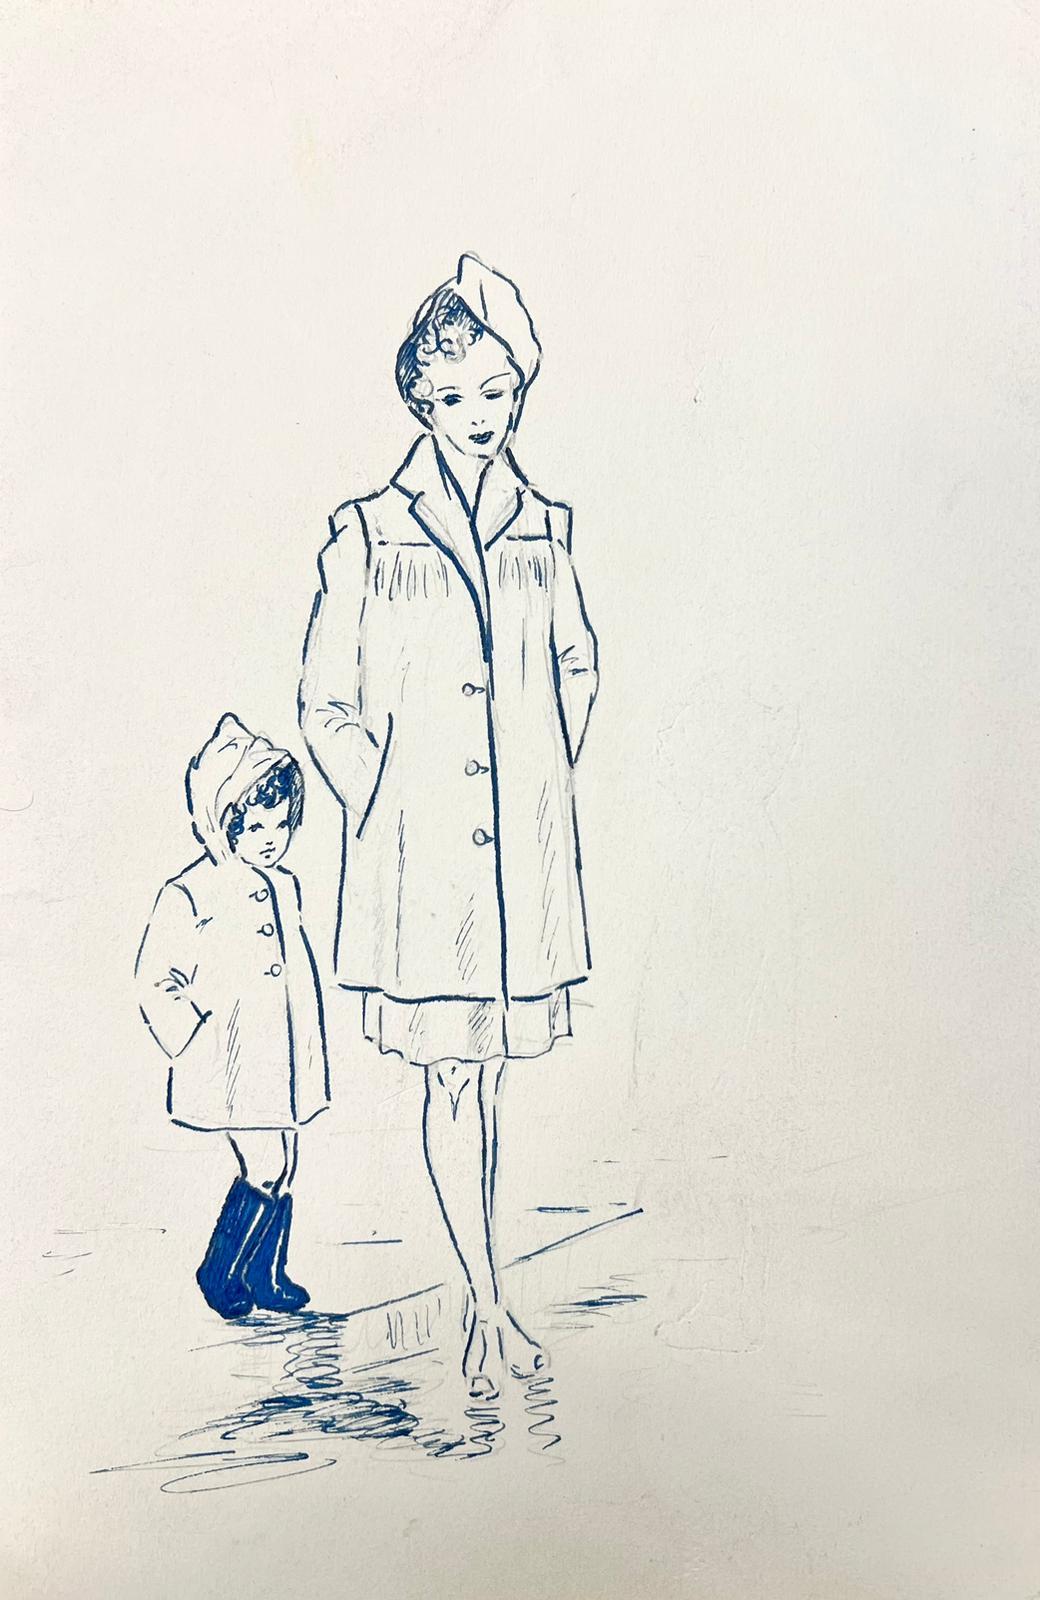 1950’s Fashion Illustration Painting Of Mother & Child Walking In The Puddles